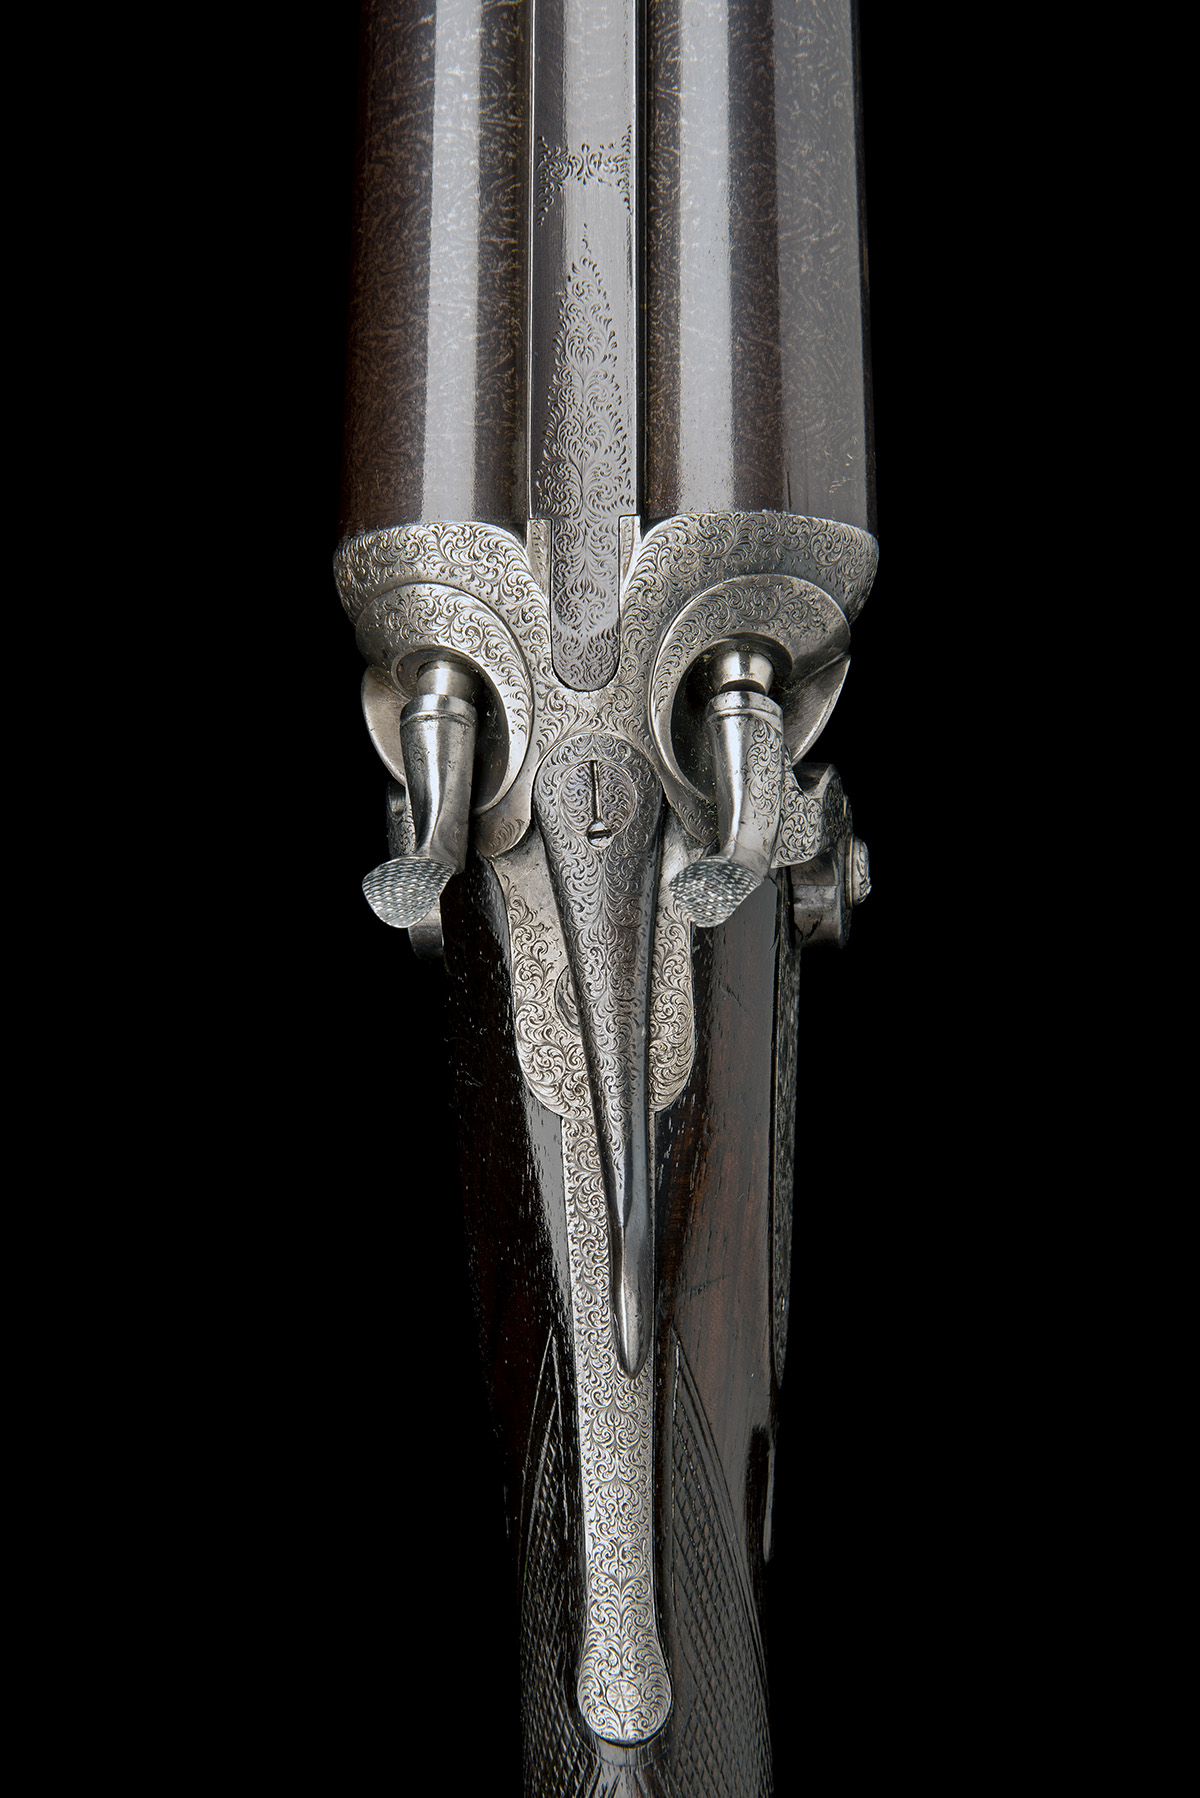 TRULOCK & HARRISS A 10-BORE (89MM) DOUBLE-BARRELLED TOPLEVER HAMMERGUN, serial no. 7774, 29 7/8in. - Image 4 of 12